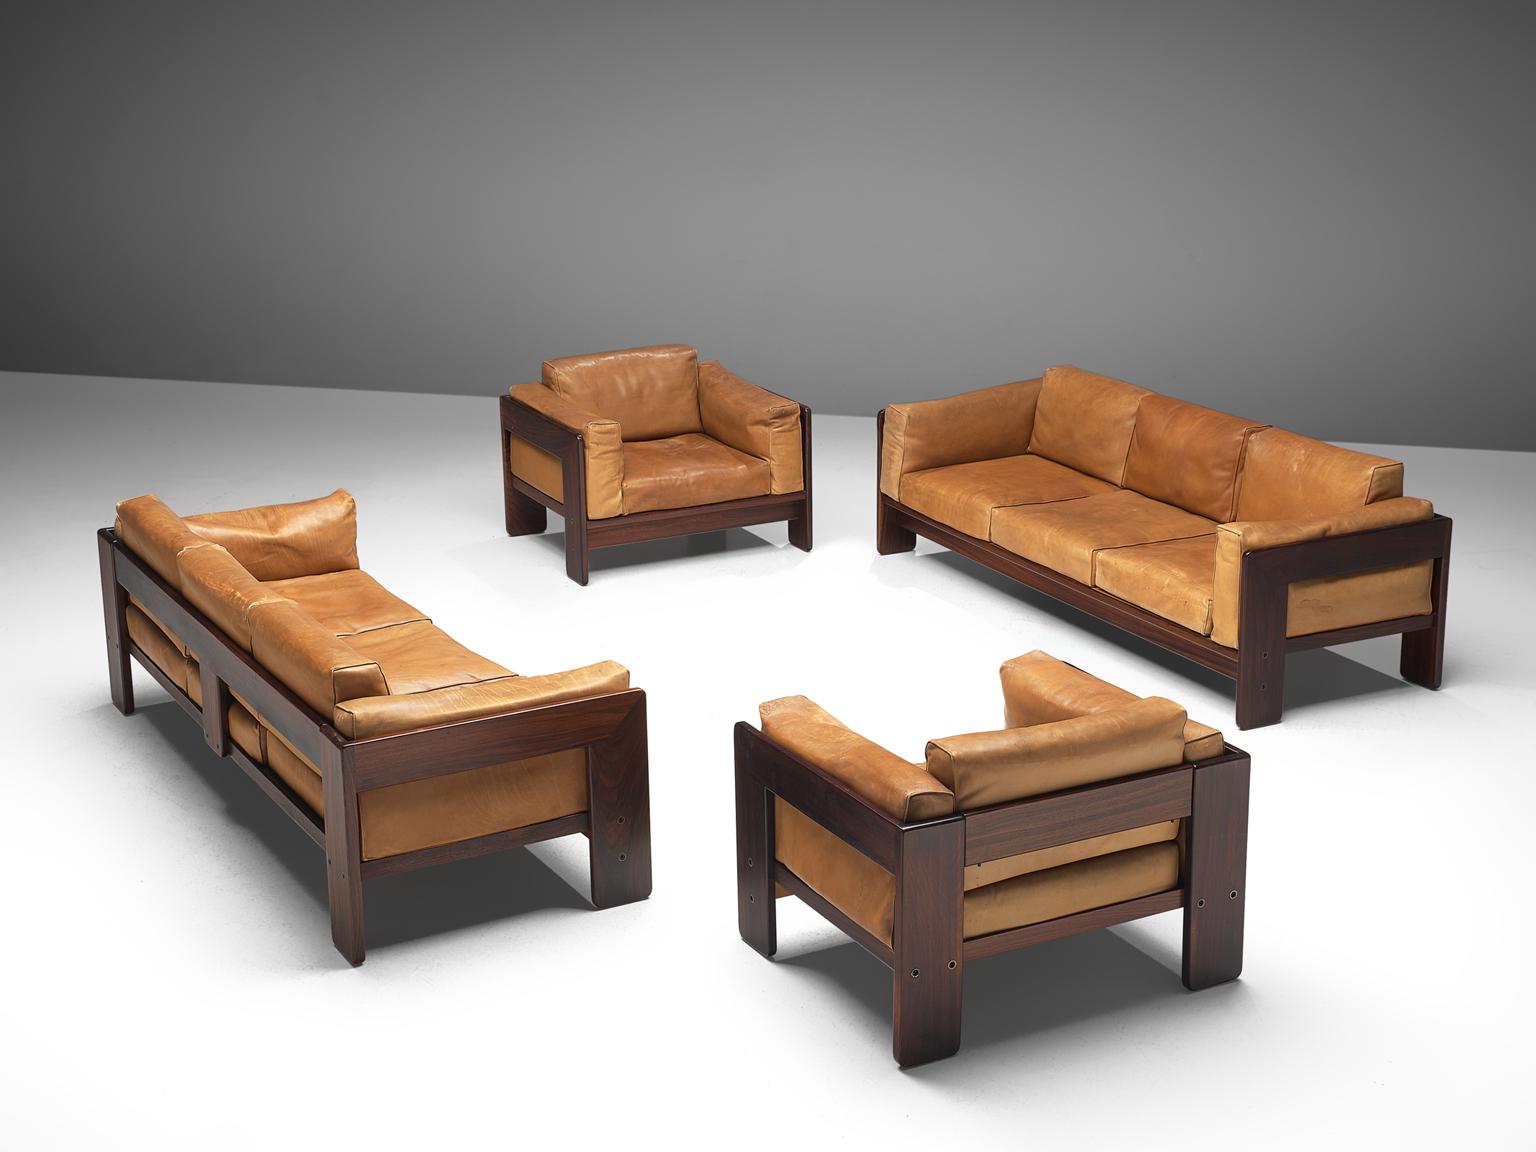 Tobia Scarpa for Knoll, 'Bastiano' lounge set, leather and rosewood, Italy, design 1960, manufactured between 1969-1970s.

Beautiful set of Bastiano club chairs and sofas made with a rosewood frame and cognac leather cushions. Tobia Scarpa